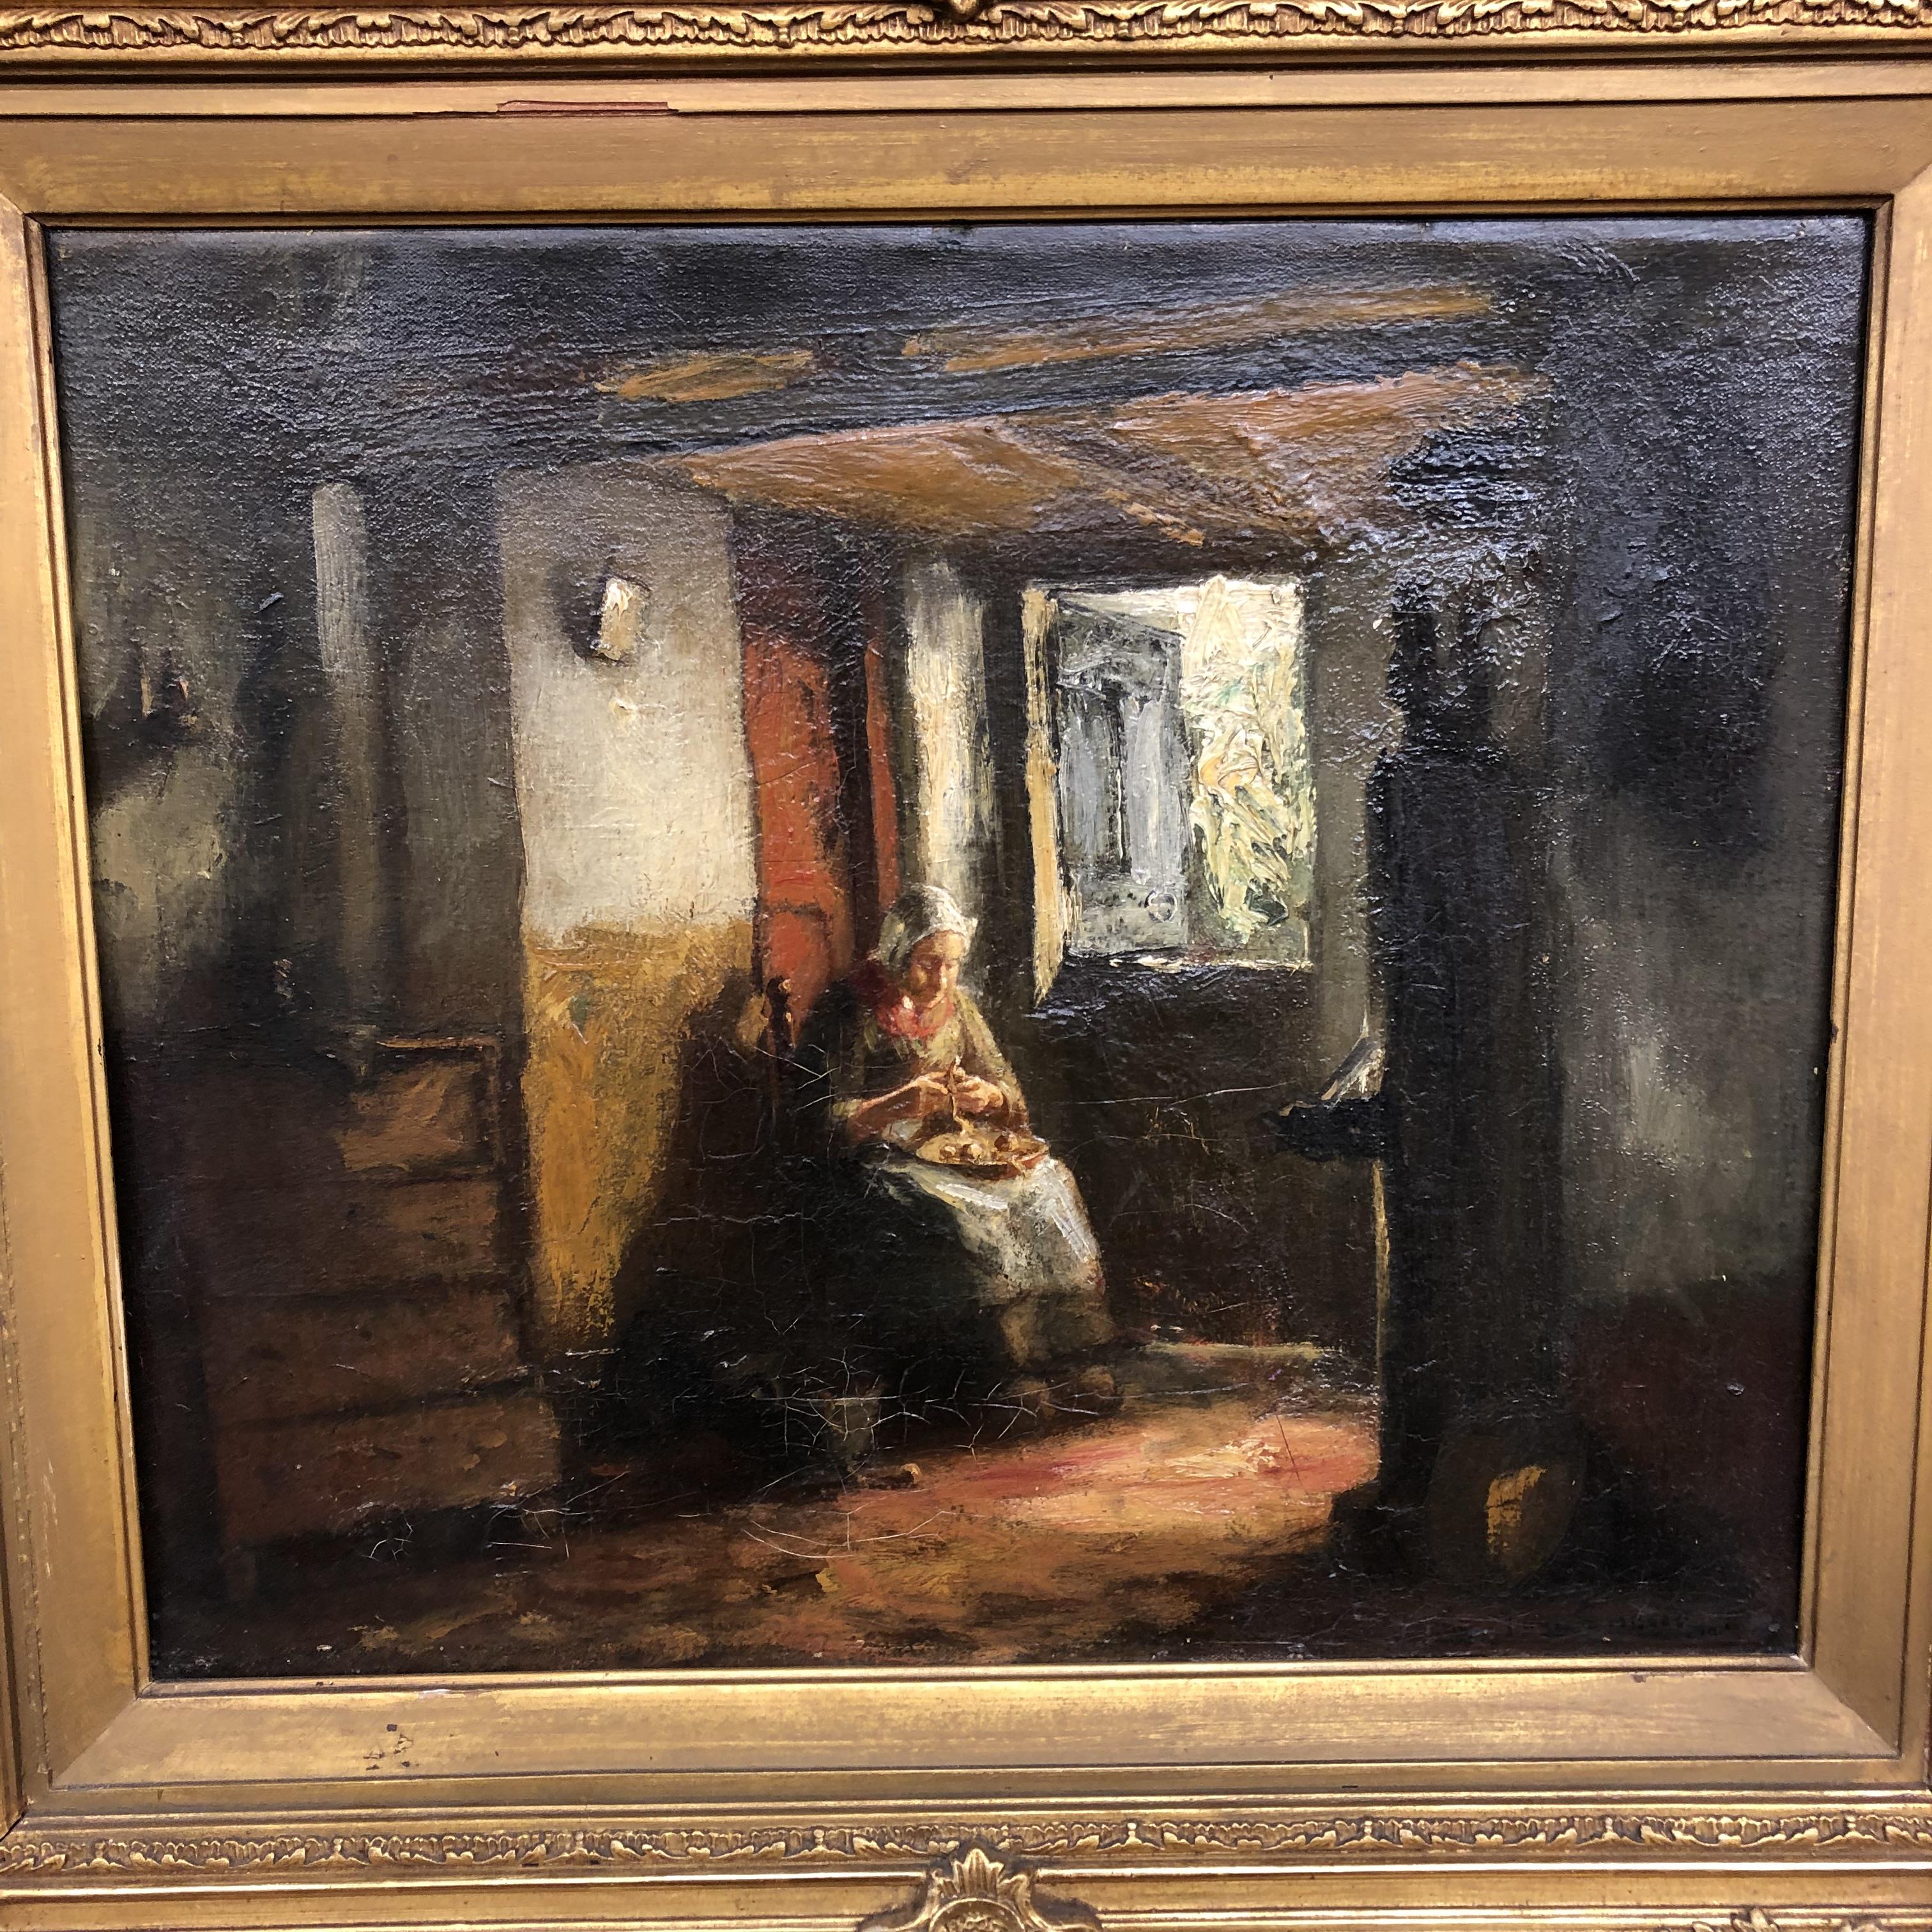 19TH CENTURY DUTCH SCHOOL- OIL ON CANVAS OF A SEATED ELDERLY LADY PEELING POTATOES IN AN INTERIOR - Image 3 of 5